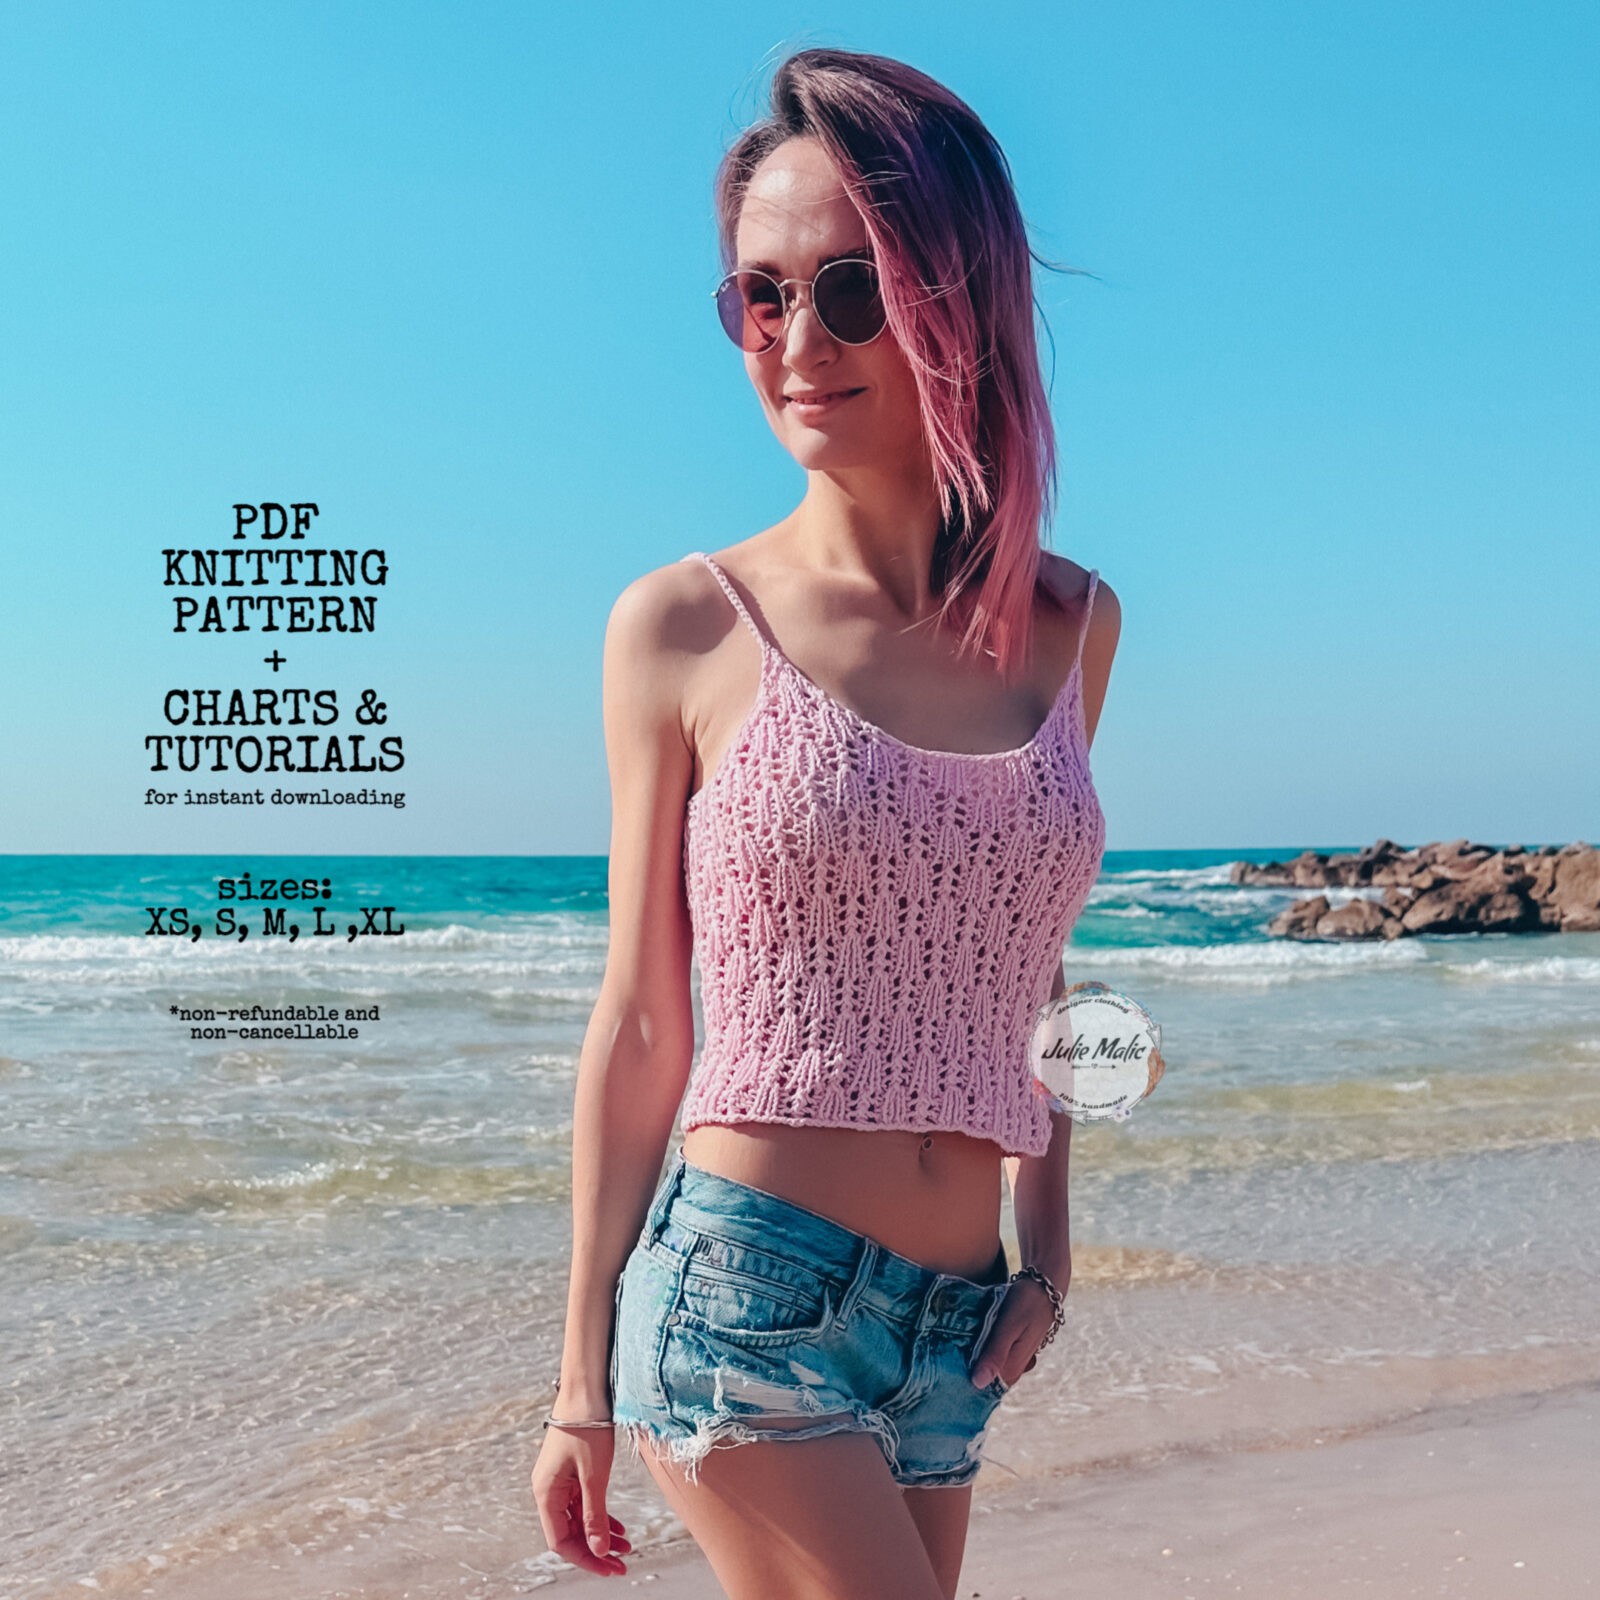 beach cover up lace tank top buy knitting pattern, bohemian pink sheer top, bohemian chic clothing, boho crop top, cheeky bikini top, cotton cropped tank women, country crochet tank top, festival outfit clothing women, fishnet top, goa top, gypsy top, hand knit top, knitted top, fitted top, tight knit top, mesh crop top, minimalist top, organic cotton top, sexy see through top, sheer bell lace knitting stitches top, summer sheer tops, beach resort clothing, vacation fashion, knitted fashion, nude top women, purple top, orange top, bright top Knitting pattern, pdf knitting pattern, knit pattern, knitting tutorial, knitting instruction, step by step pattern, easy knitting pattern, knitting for beginners, beach top pattern, beach cover up pattern, sexy top knit pattern, sheer top pattern, hand knitting, knitting inspiration, diy knitting pattern